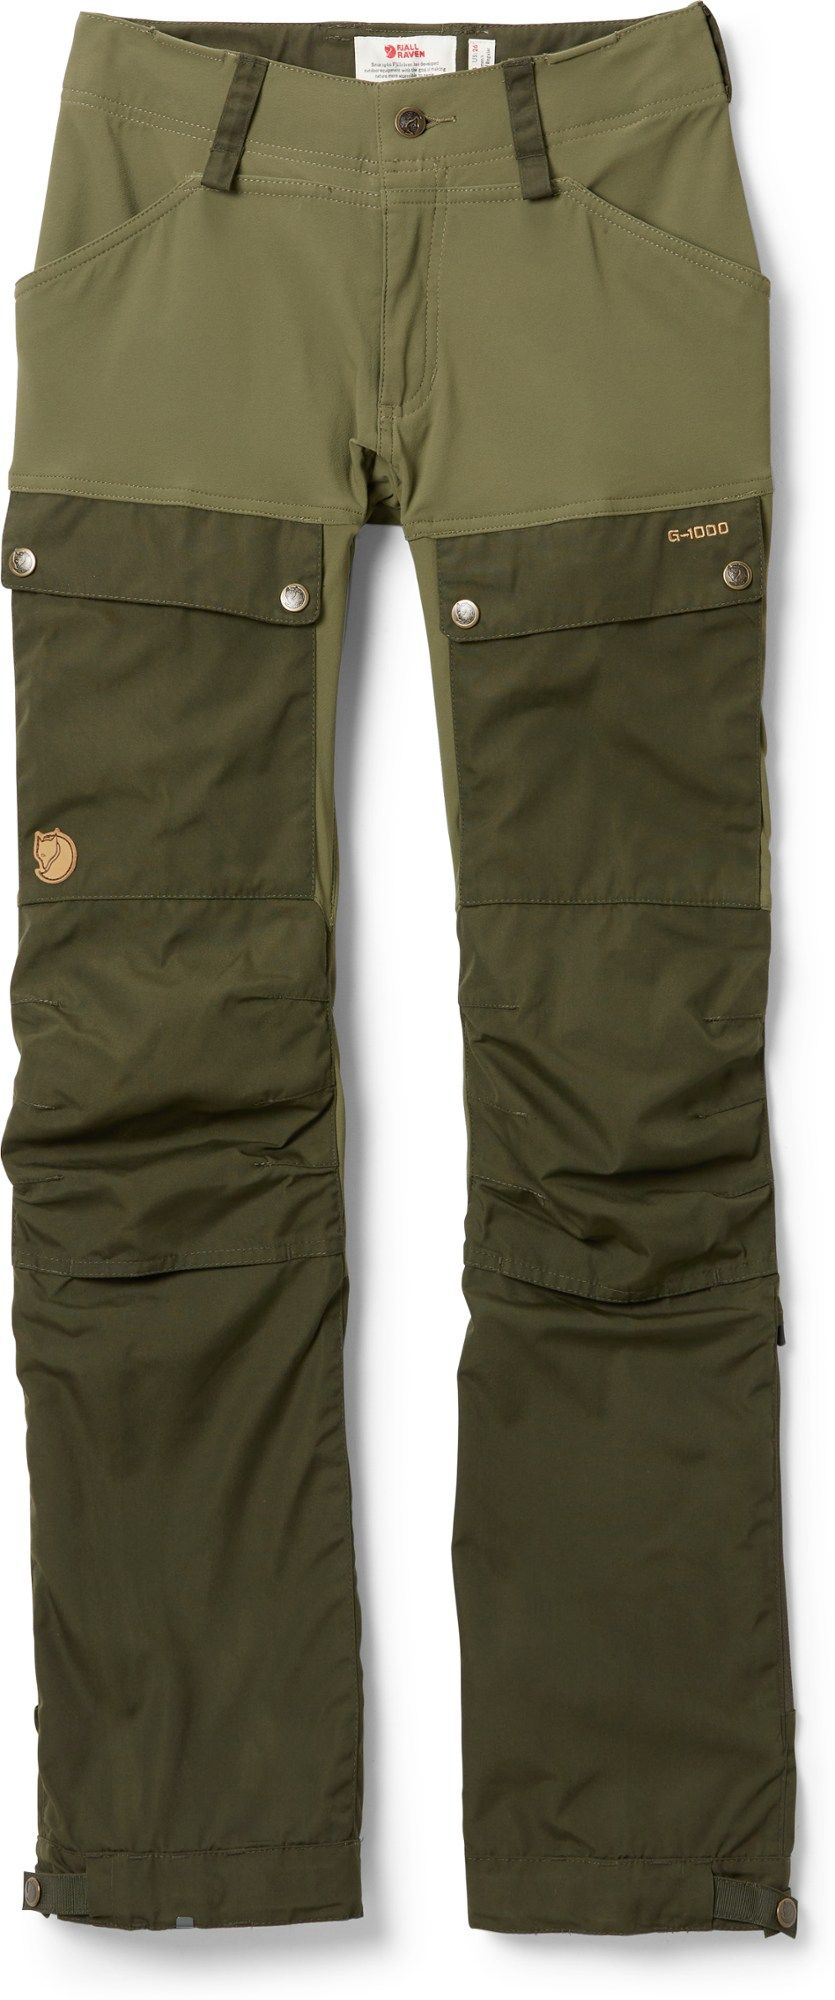 Comfortable and stylish hiking pants for
adventurous spots